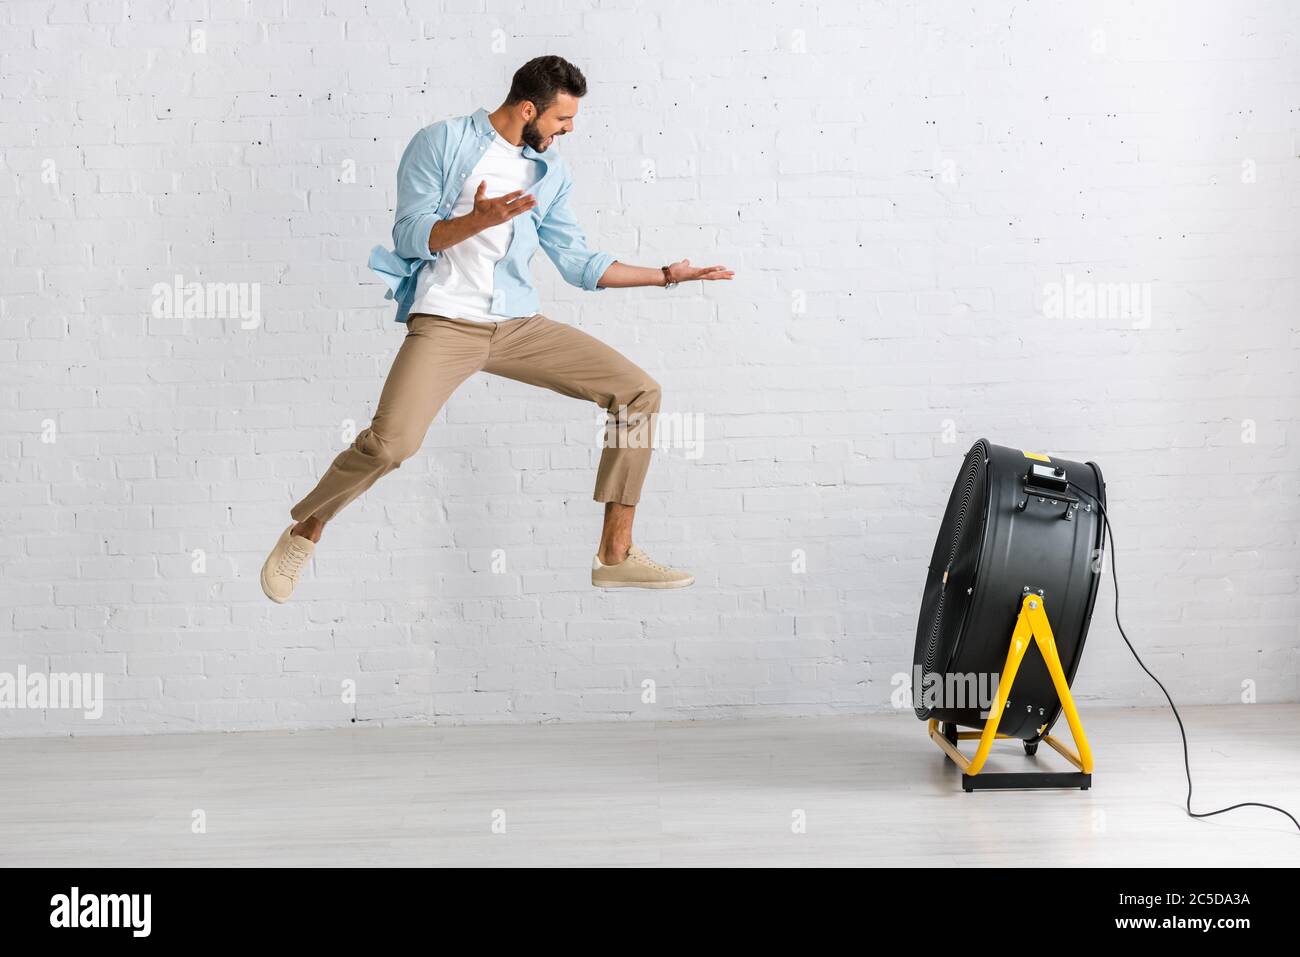 Handsome man jumping near electric fan on floor at home Stock Photo